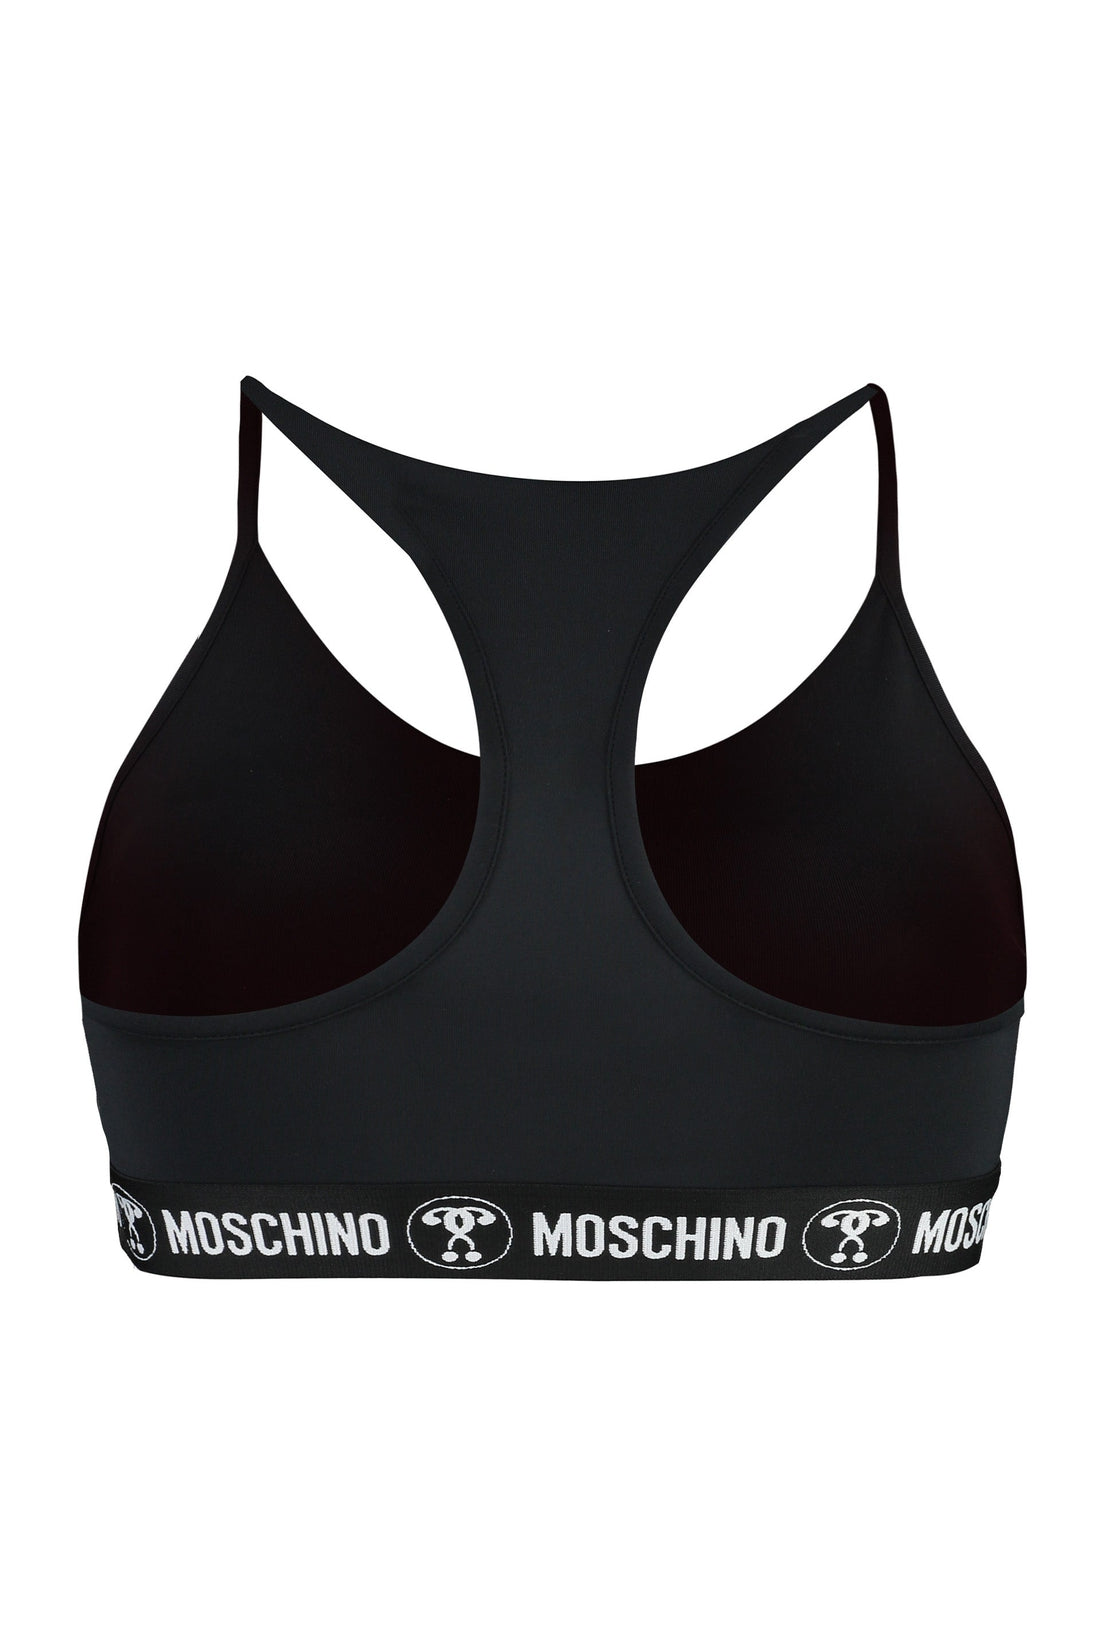 Moschino-OUTLET-SALE-Logoed elastic top bra-ARCHIVIST